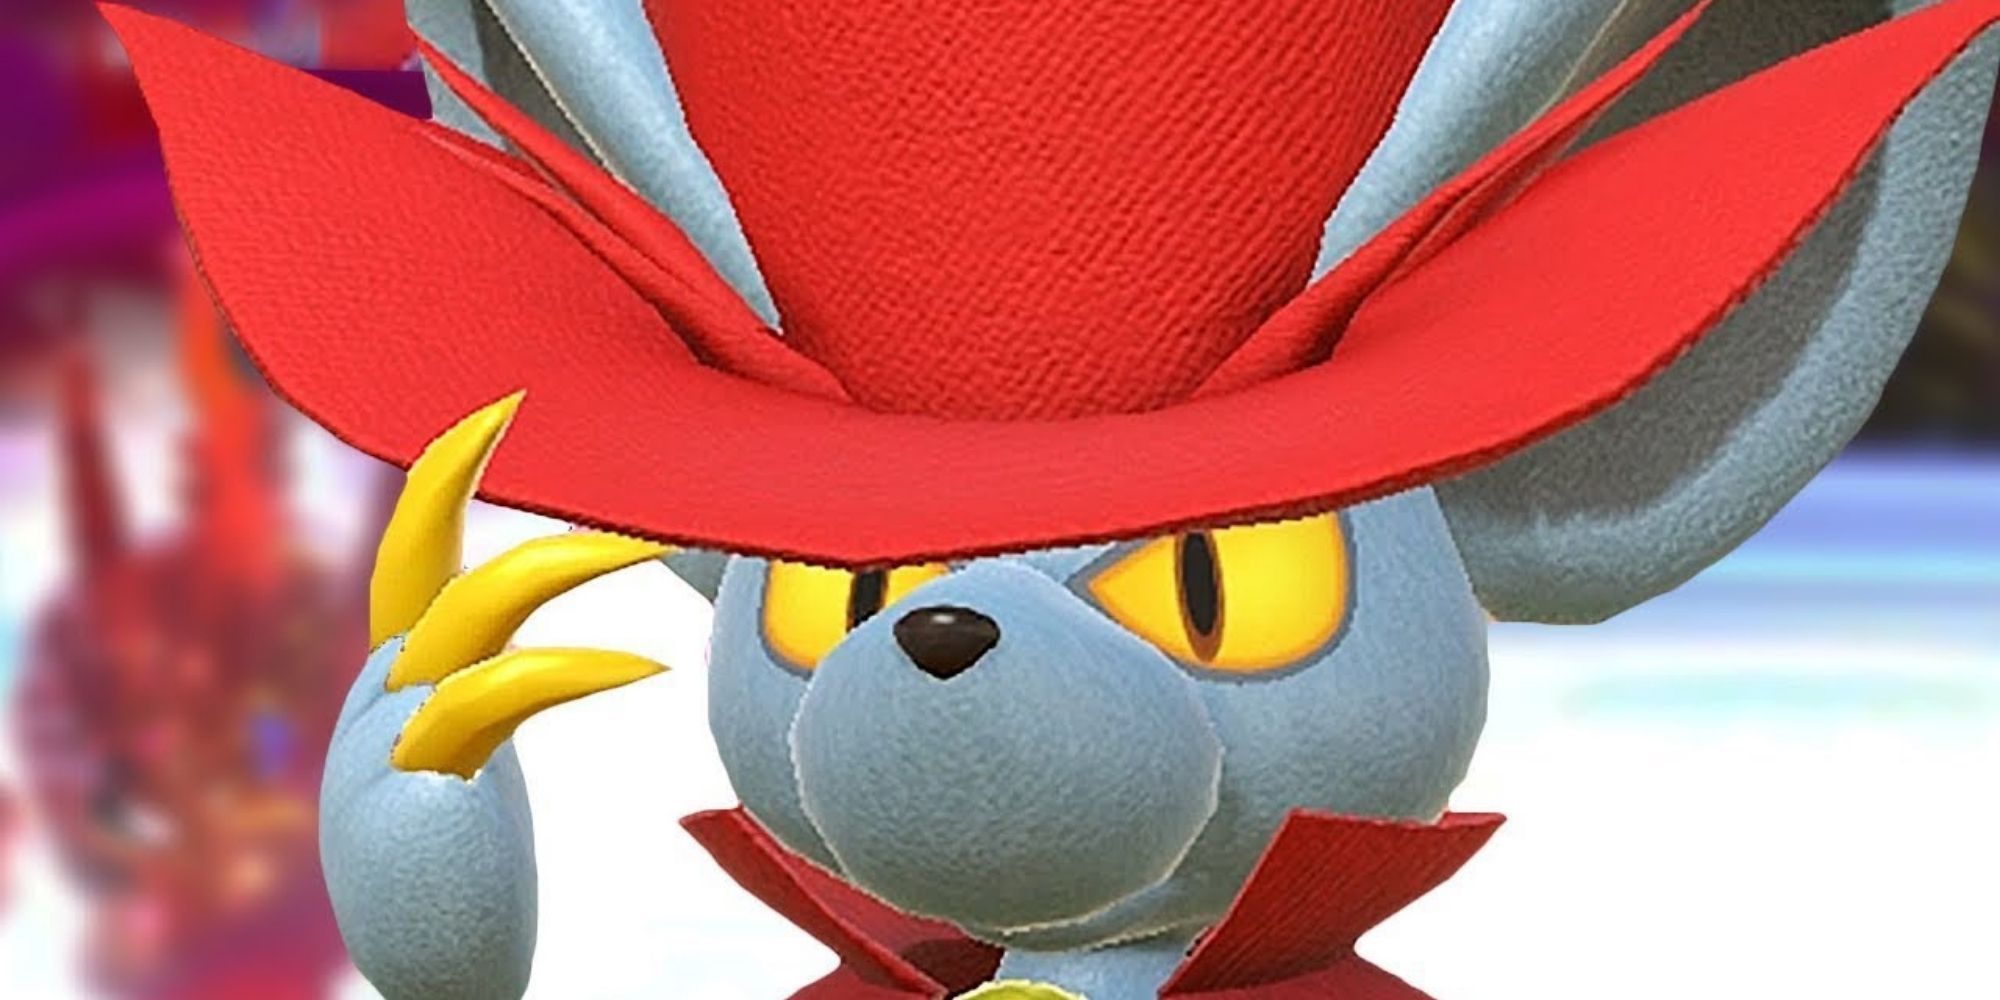 Kirby Star Allies Daroach Tips His Red Hat In A Close-Up Shot